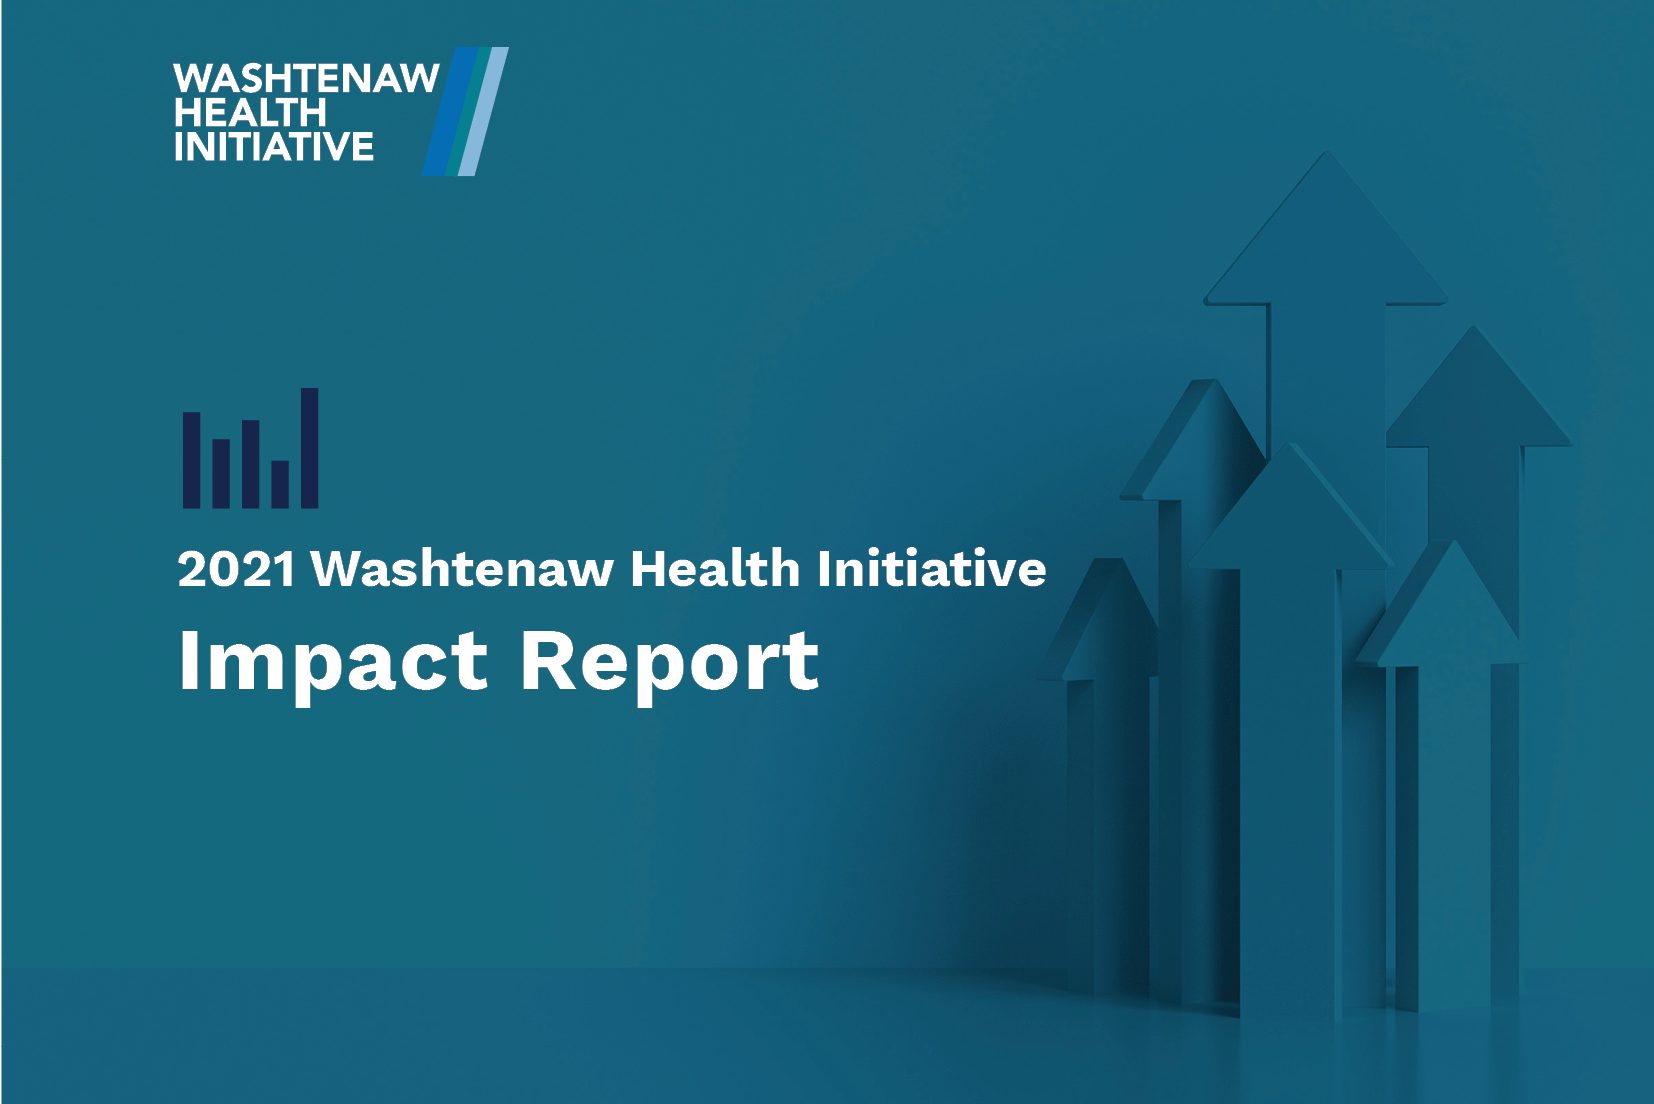 WHI shares most recent impact report